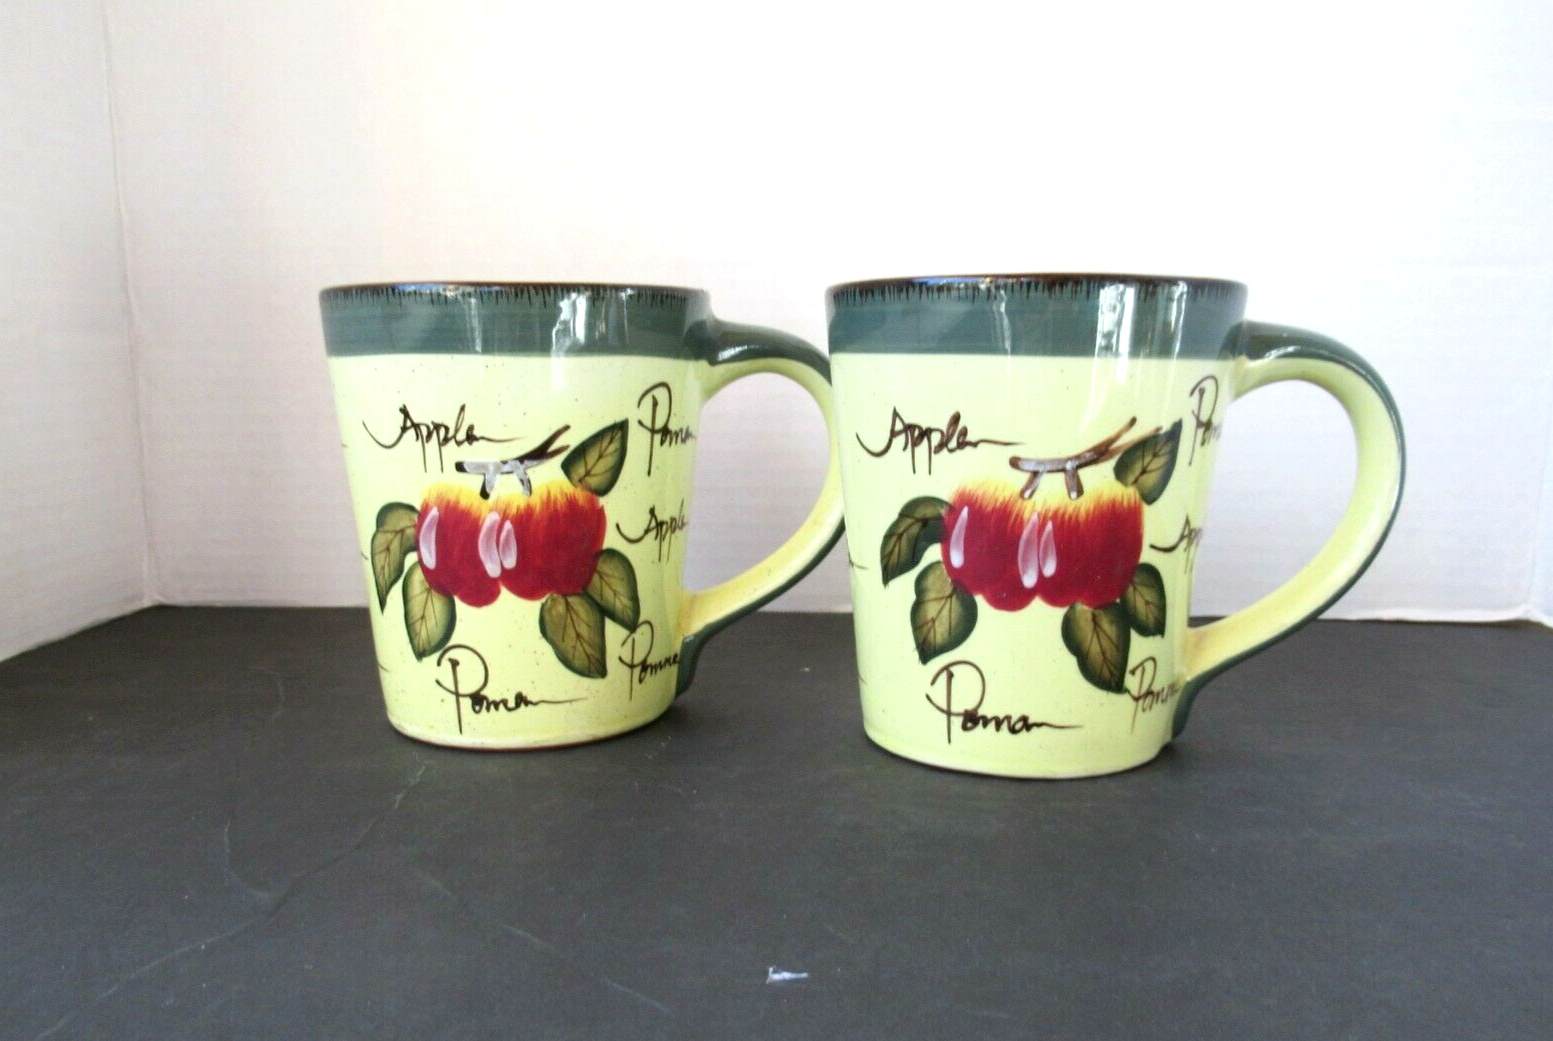 Gibson Everyday set of 2 mugs hand painted apples green red 4" H coffee tea - $15.63